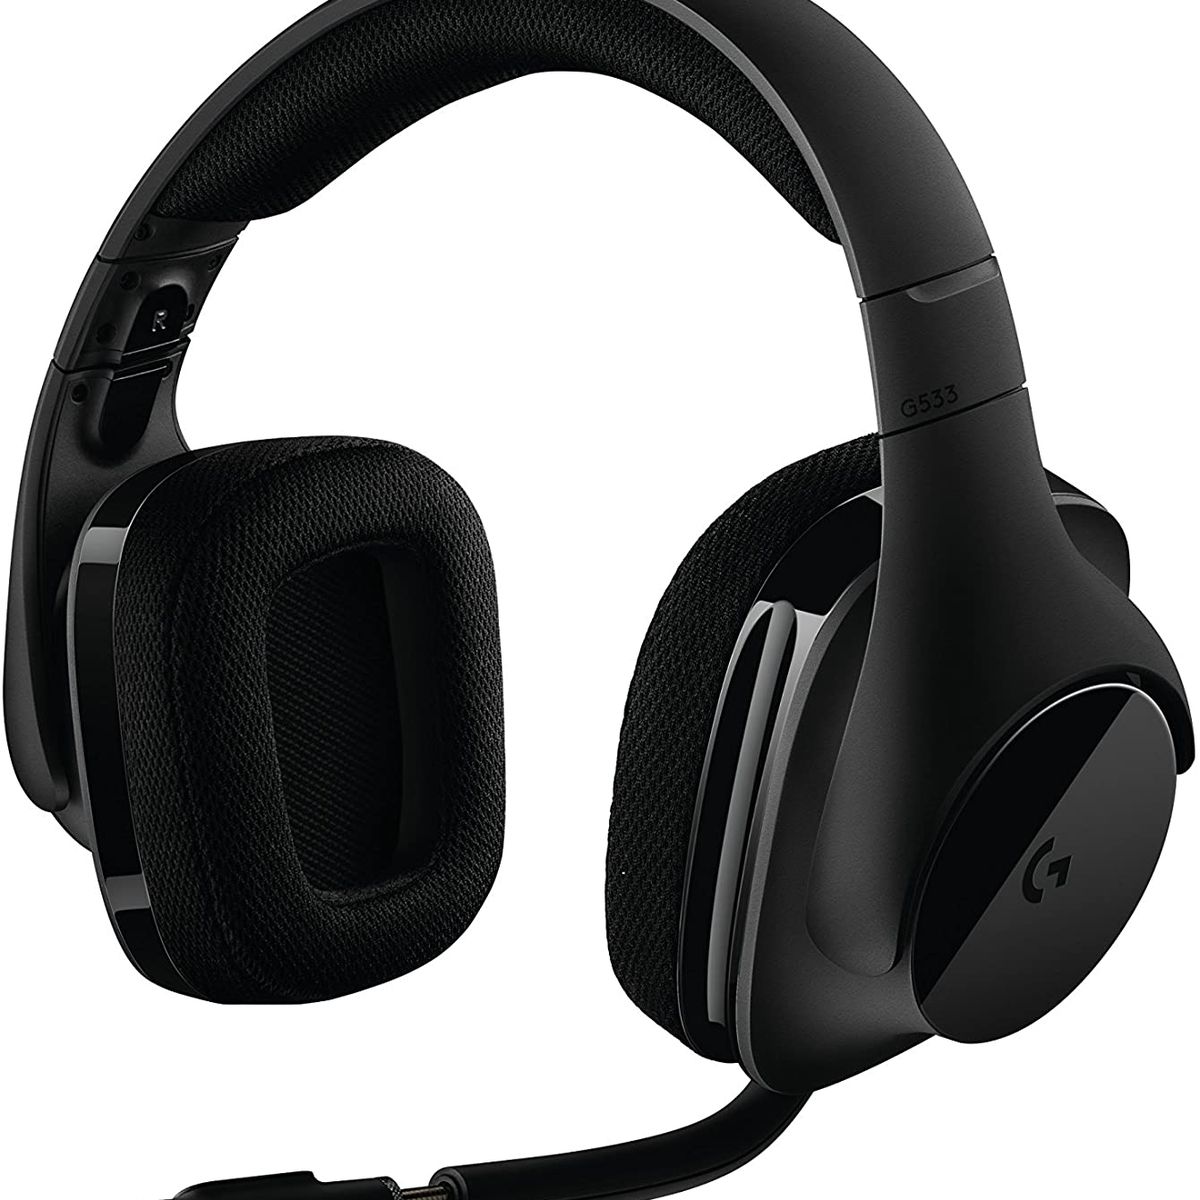 A product shot of the Logitech G533 wireless gaming headset